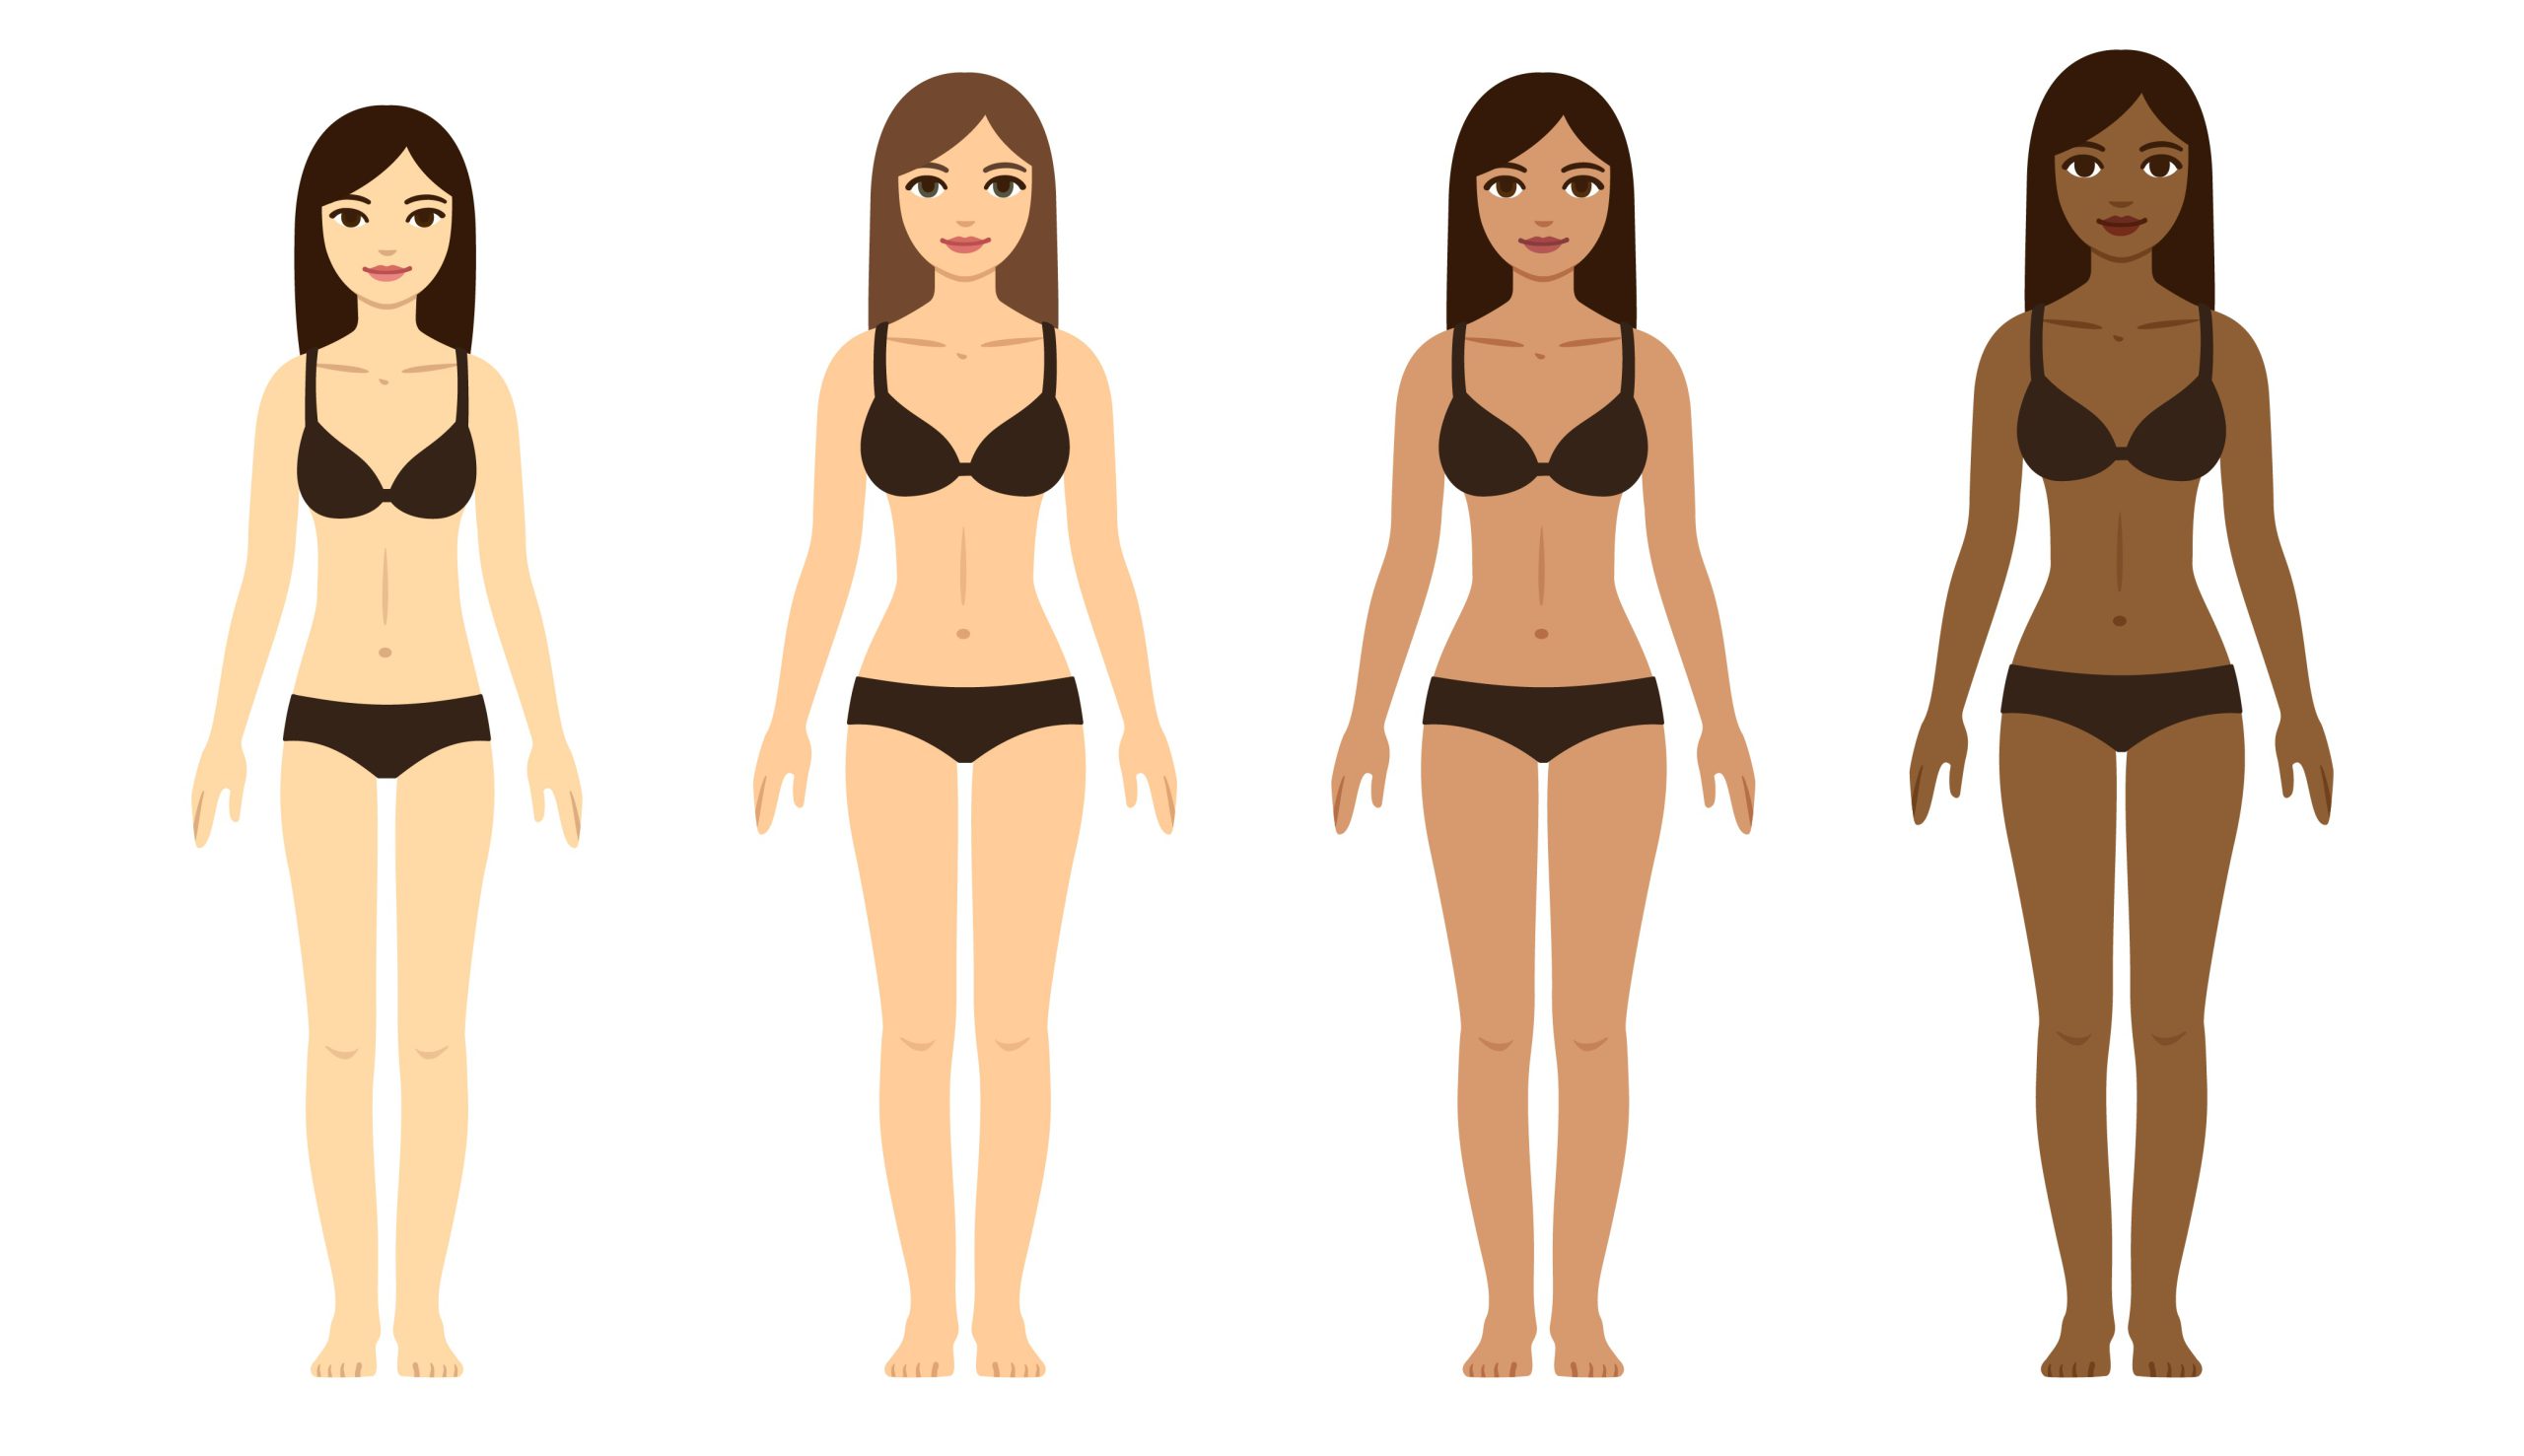 Finding Bras to Match Skin Tone – Brown is Brown is Brown, No